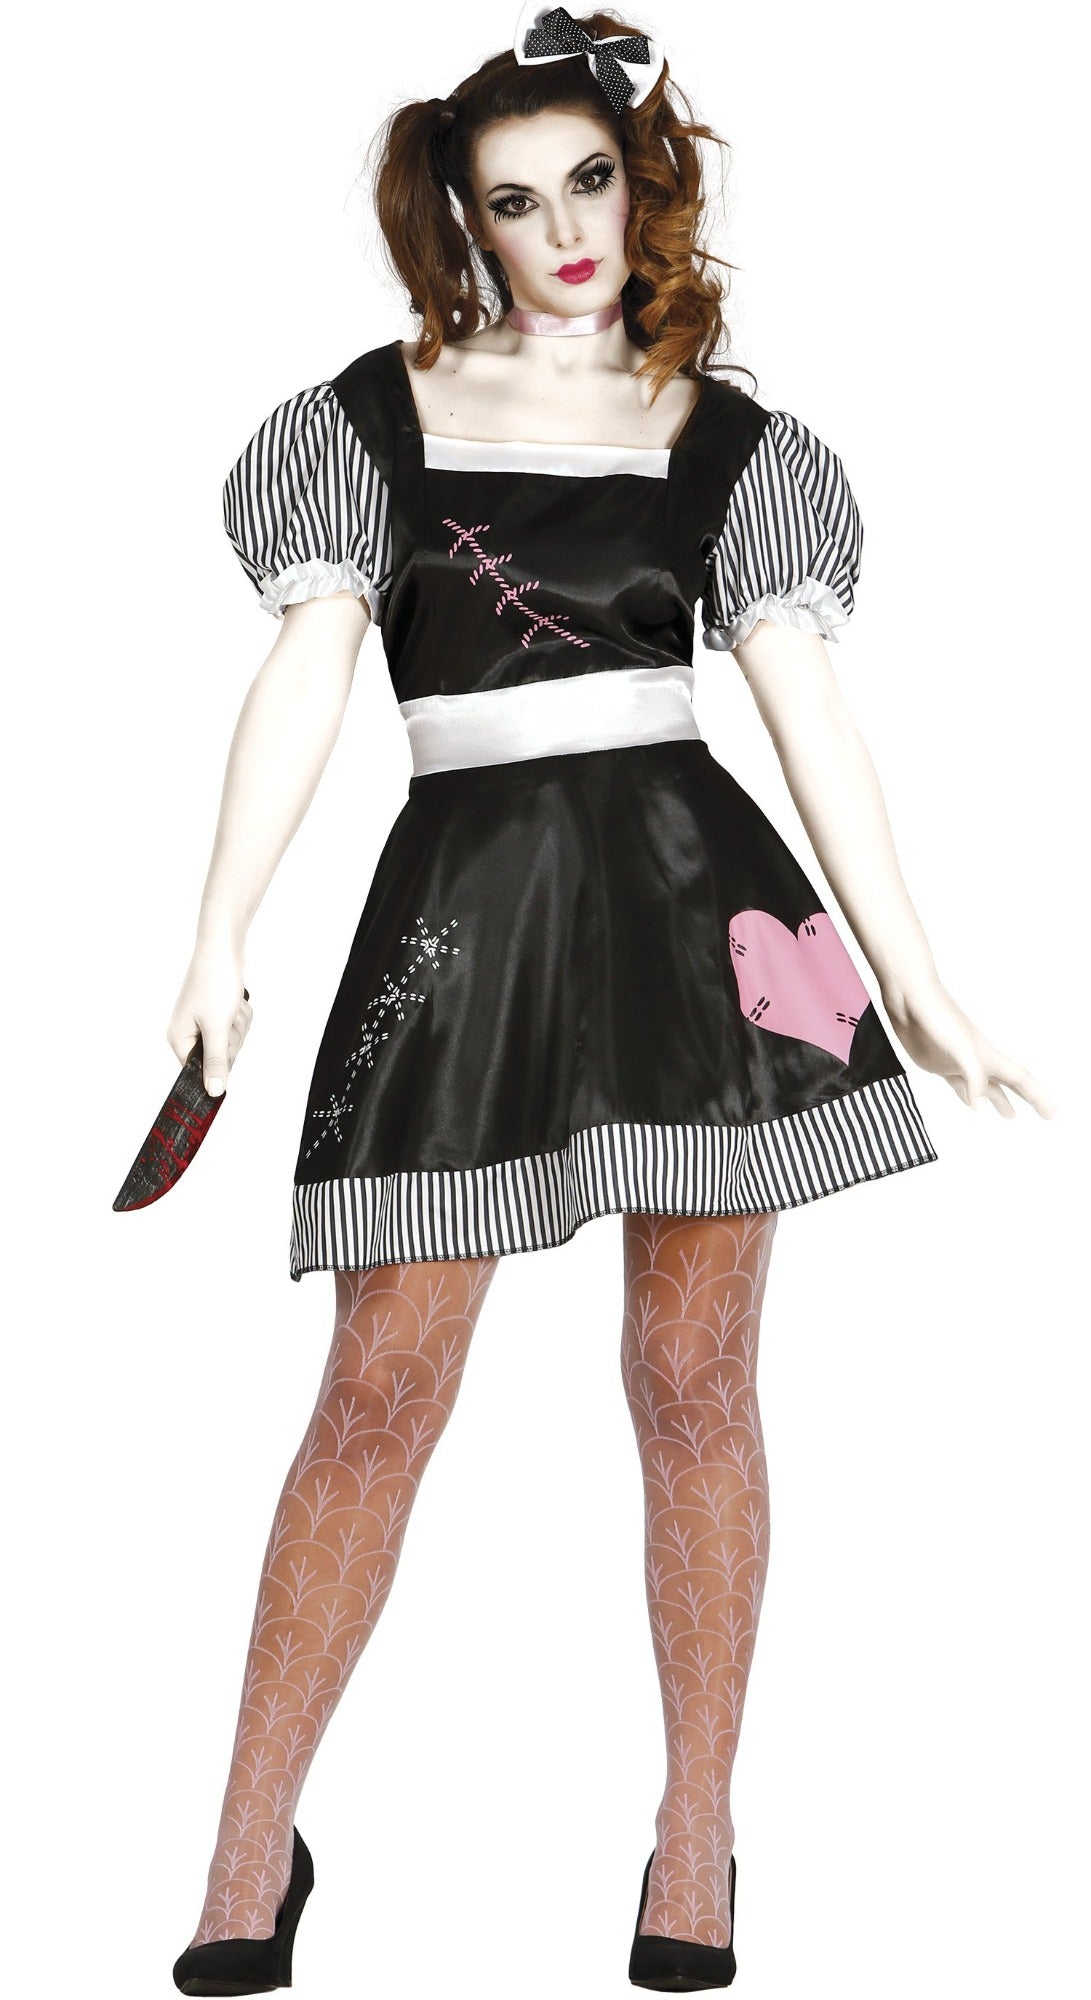 Ladies Killer Doll outfit 